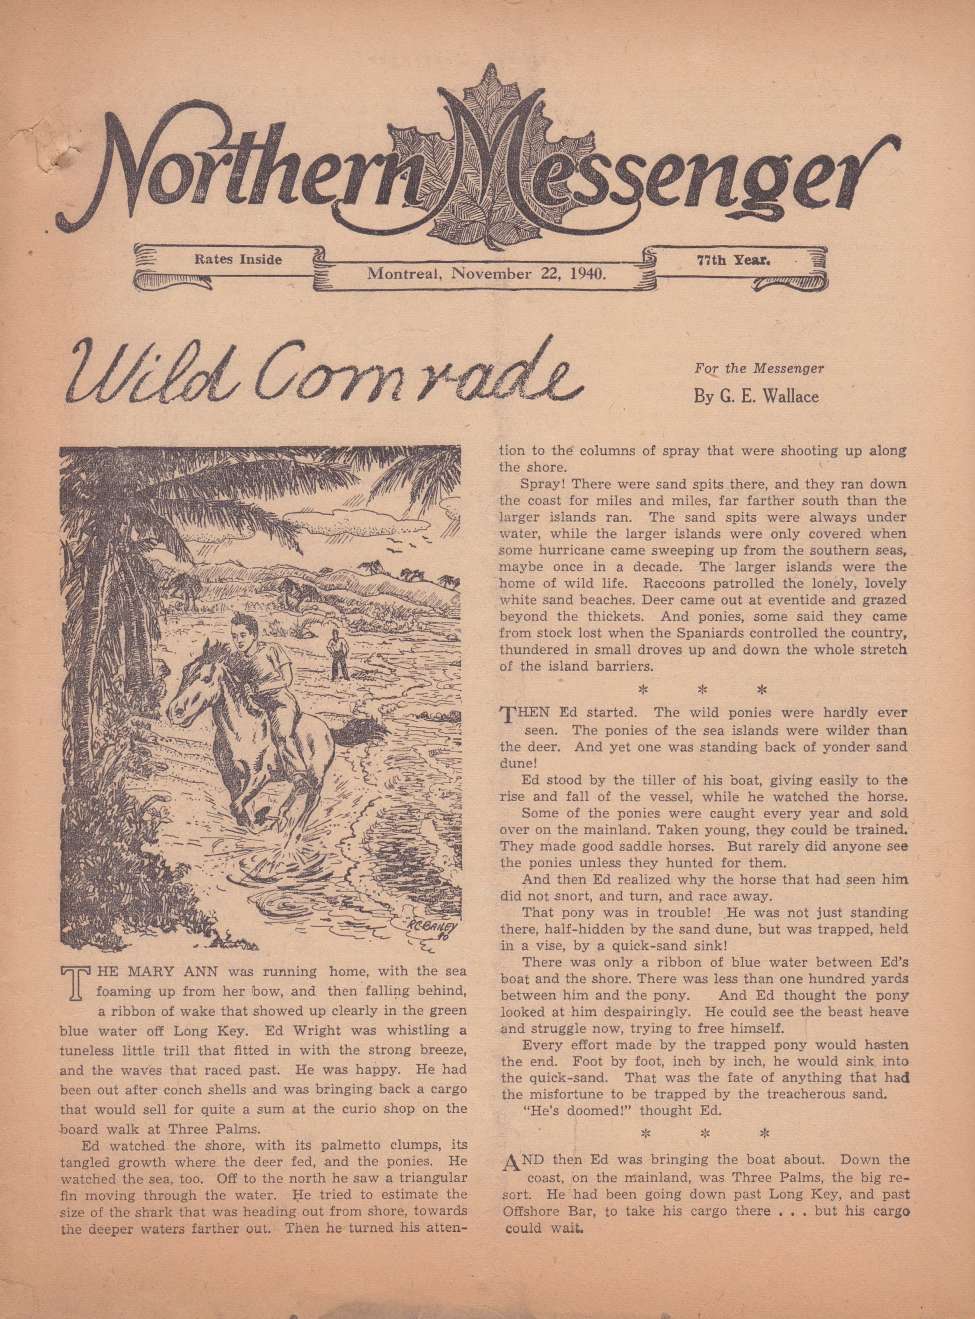 Comic Book Cover For Northern Messenger (1940-11-22)